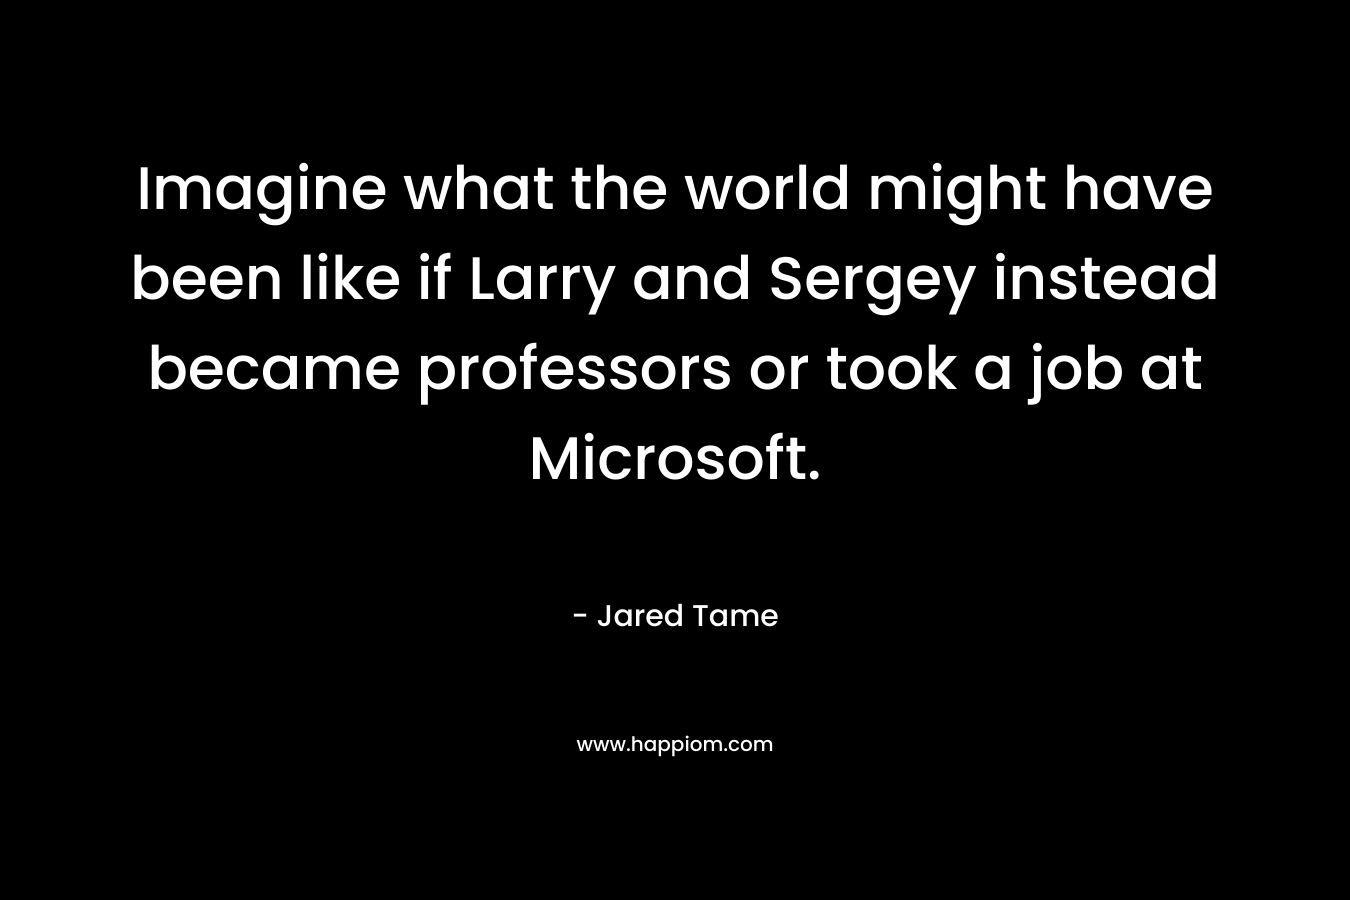 Imagine what the world might have been like if Larry and Sergey instead became professors or took a job at Microsoft. – Jared Tame